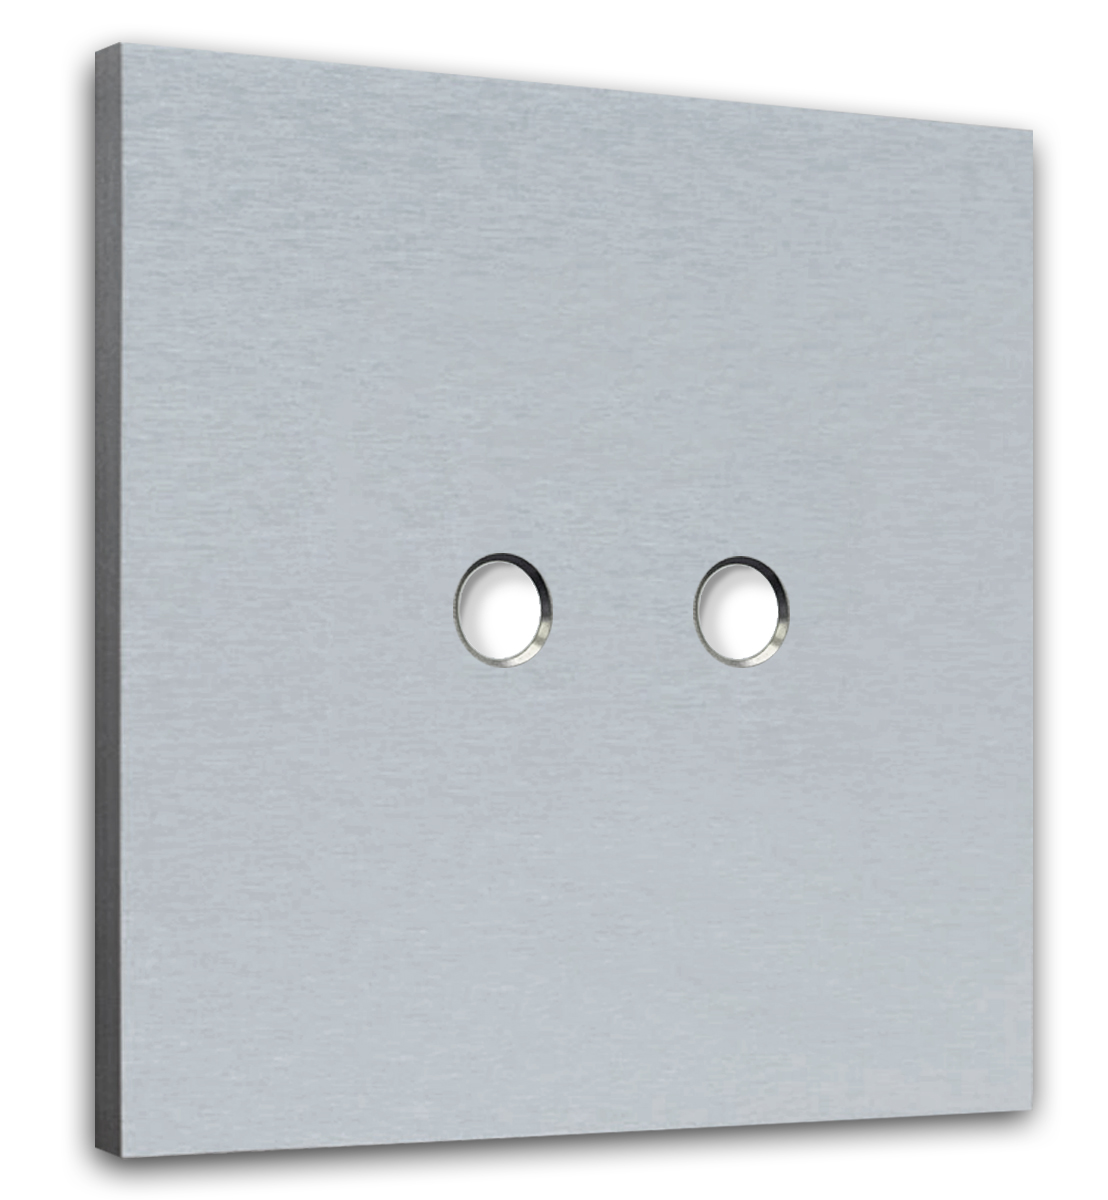 Retro toggle switch plate NINA 2-Gang.  Aluminum metal. CJC Systems